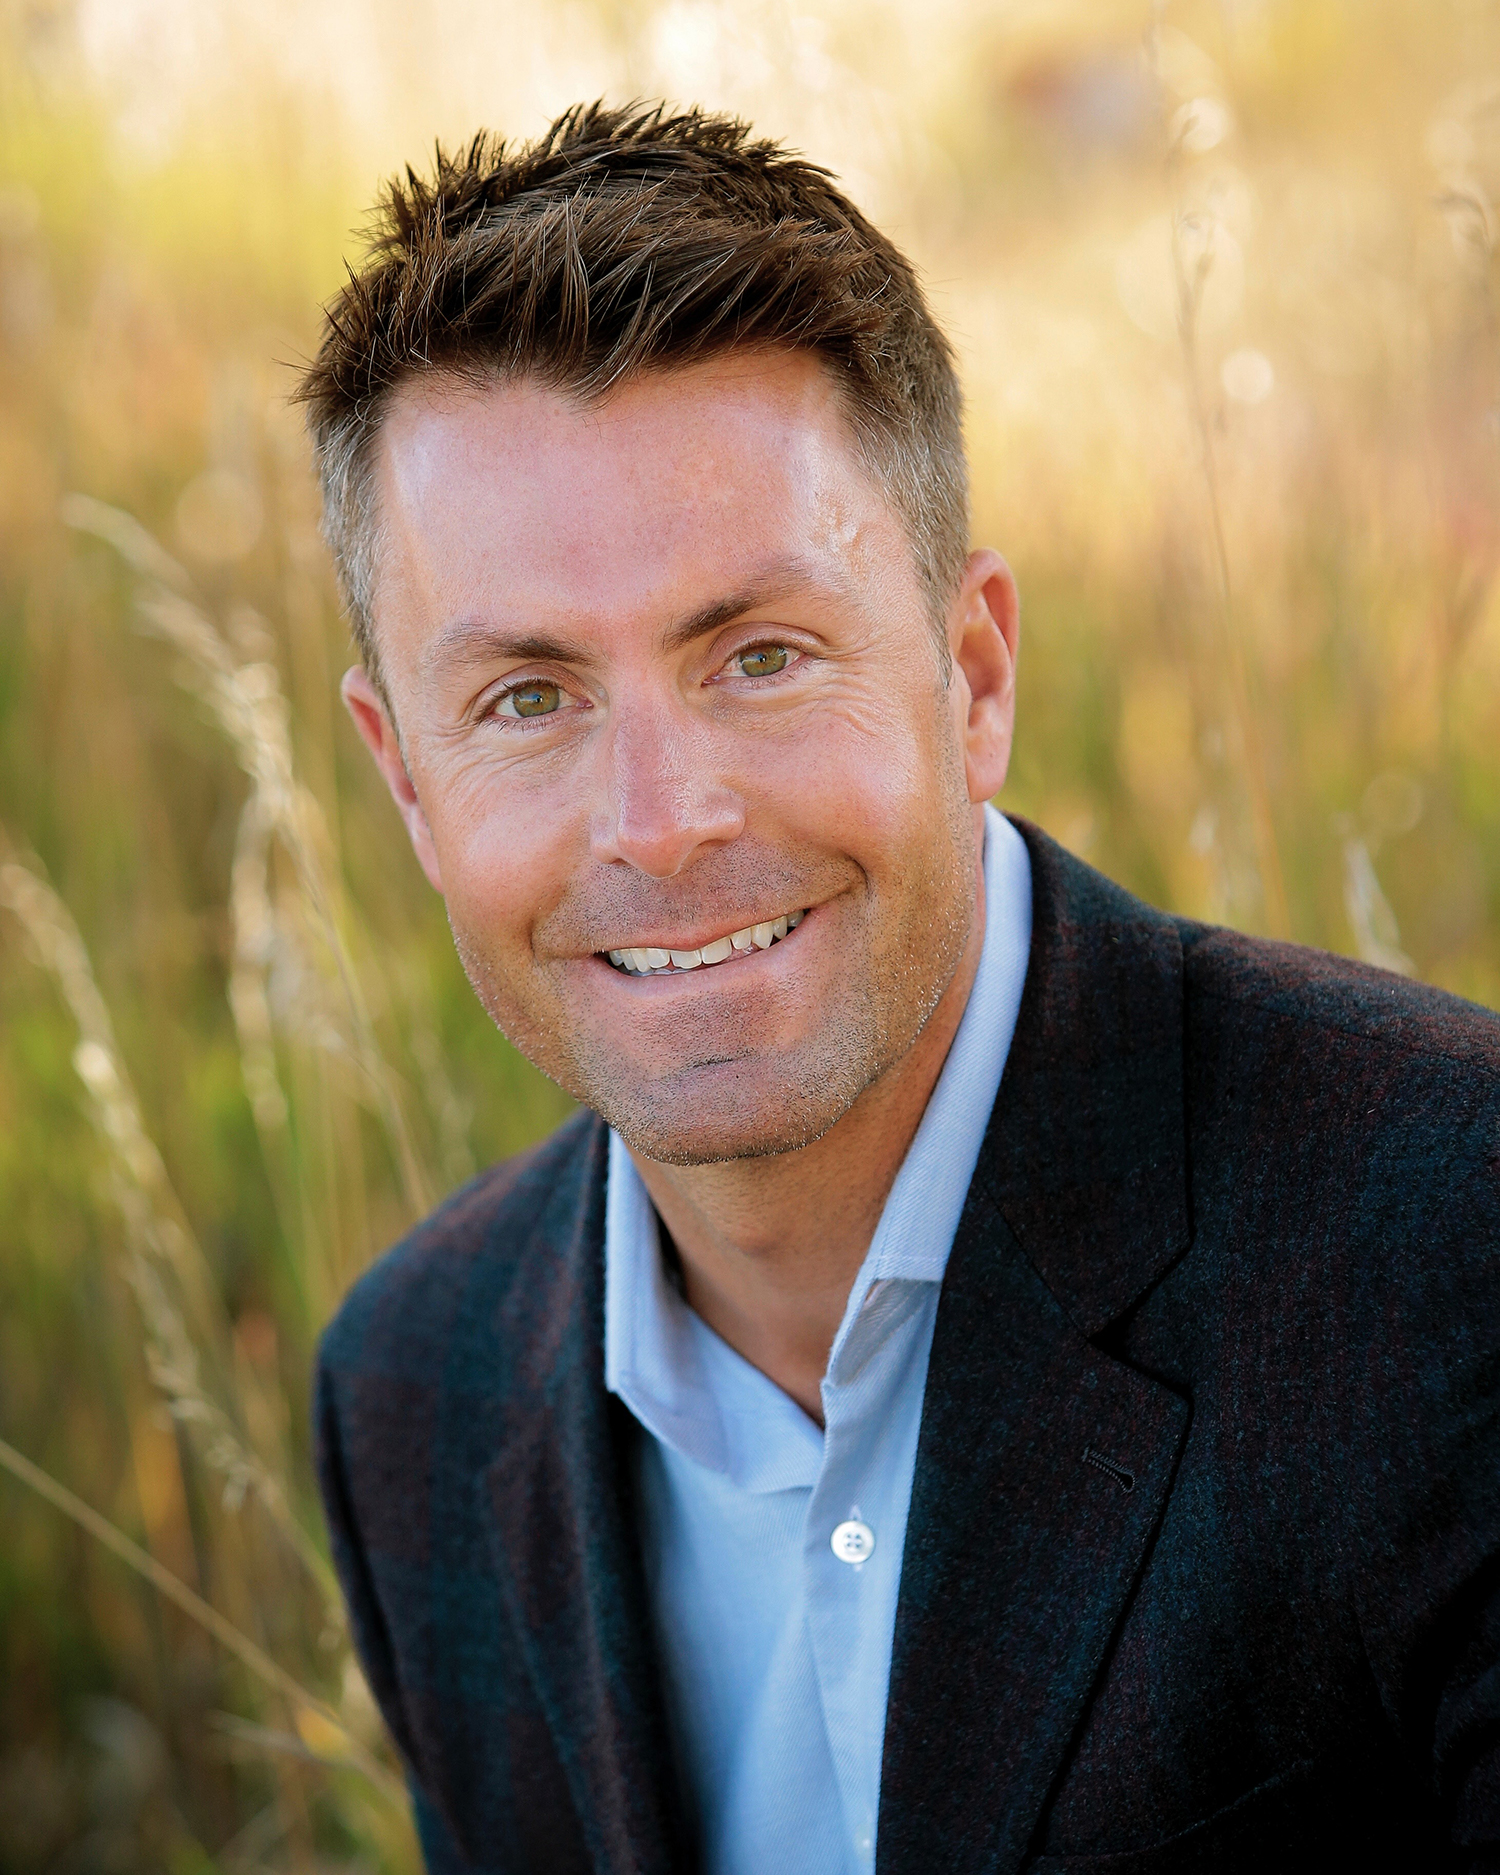 Chad McWhinney is the Chief Executive Officer & Co-Founder of McWhinney, a Colorado-based real estate investor and developer.